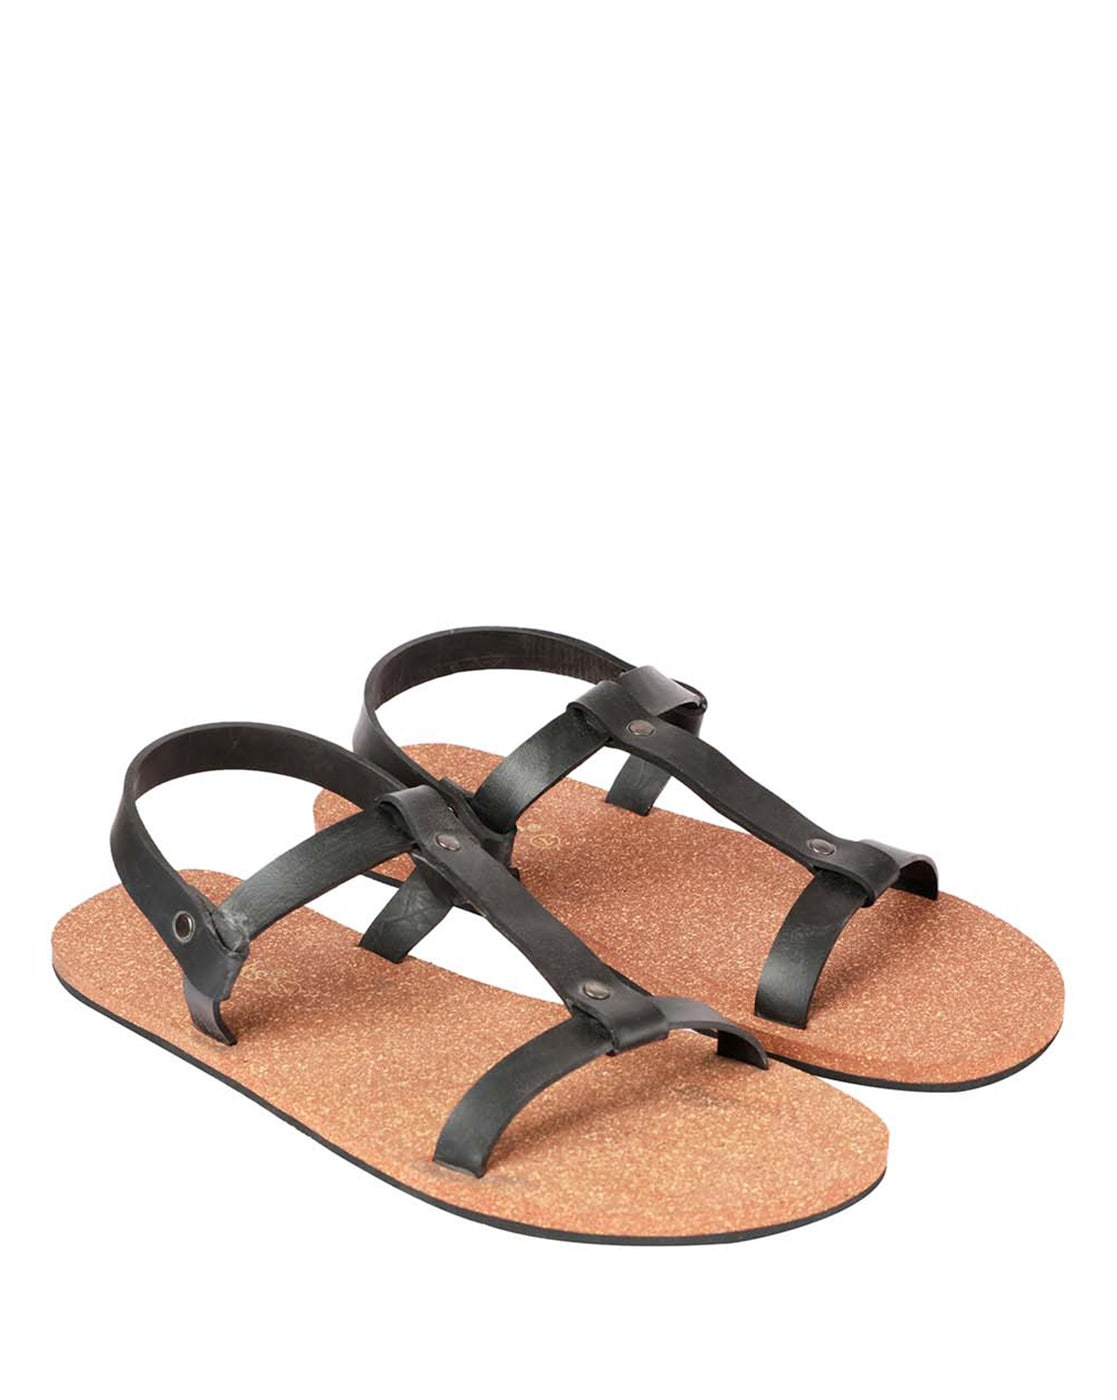 Mens Thong Sandals With Heel Strap | ShopStyle